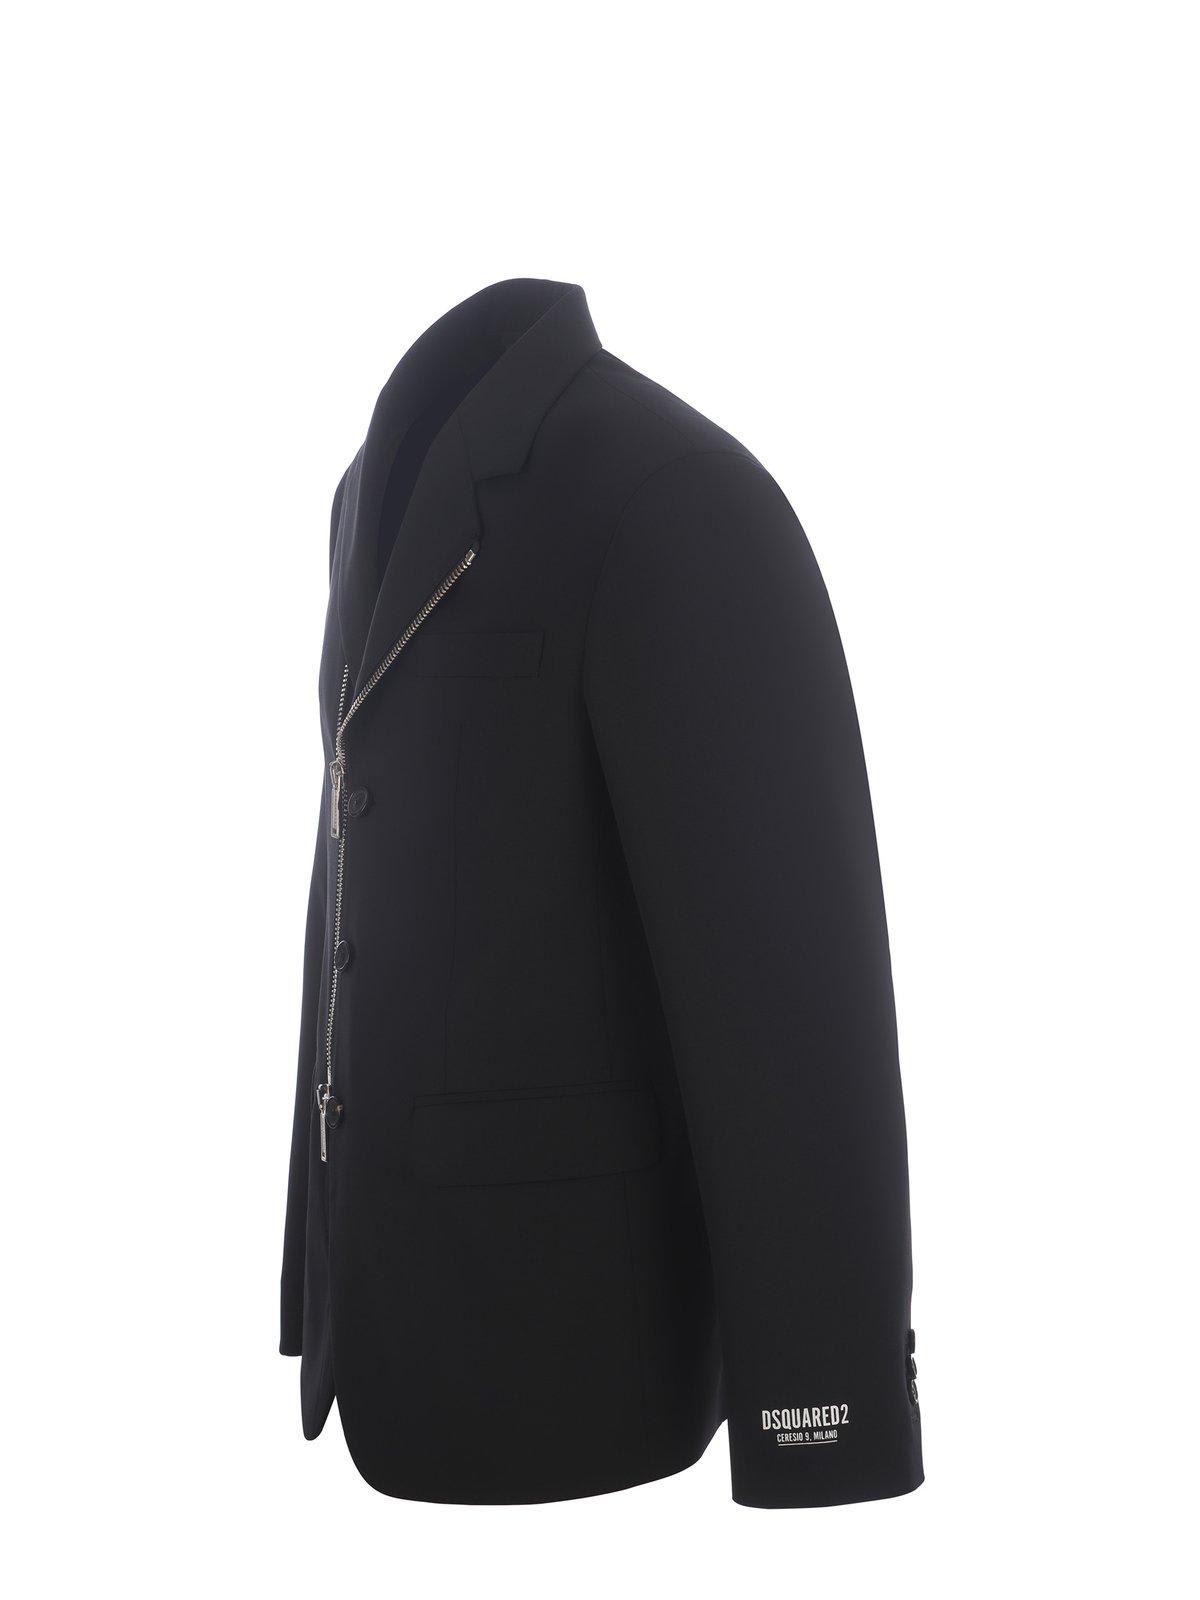 Shop Dsquared2 Ceresio 9 Zipped Jacket